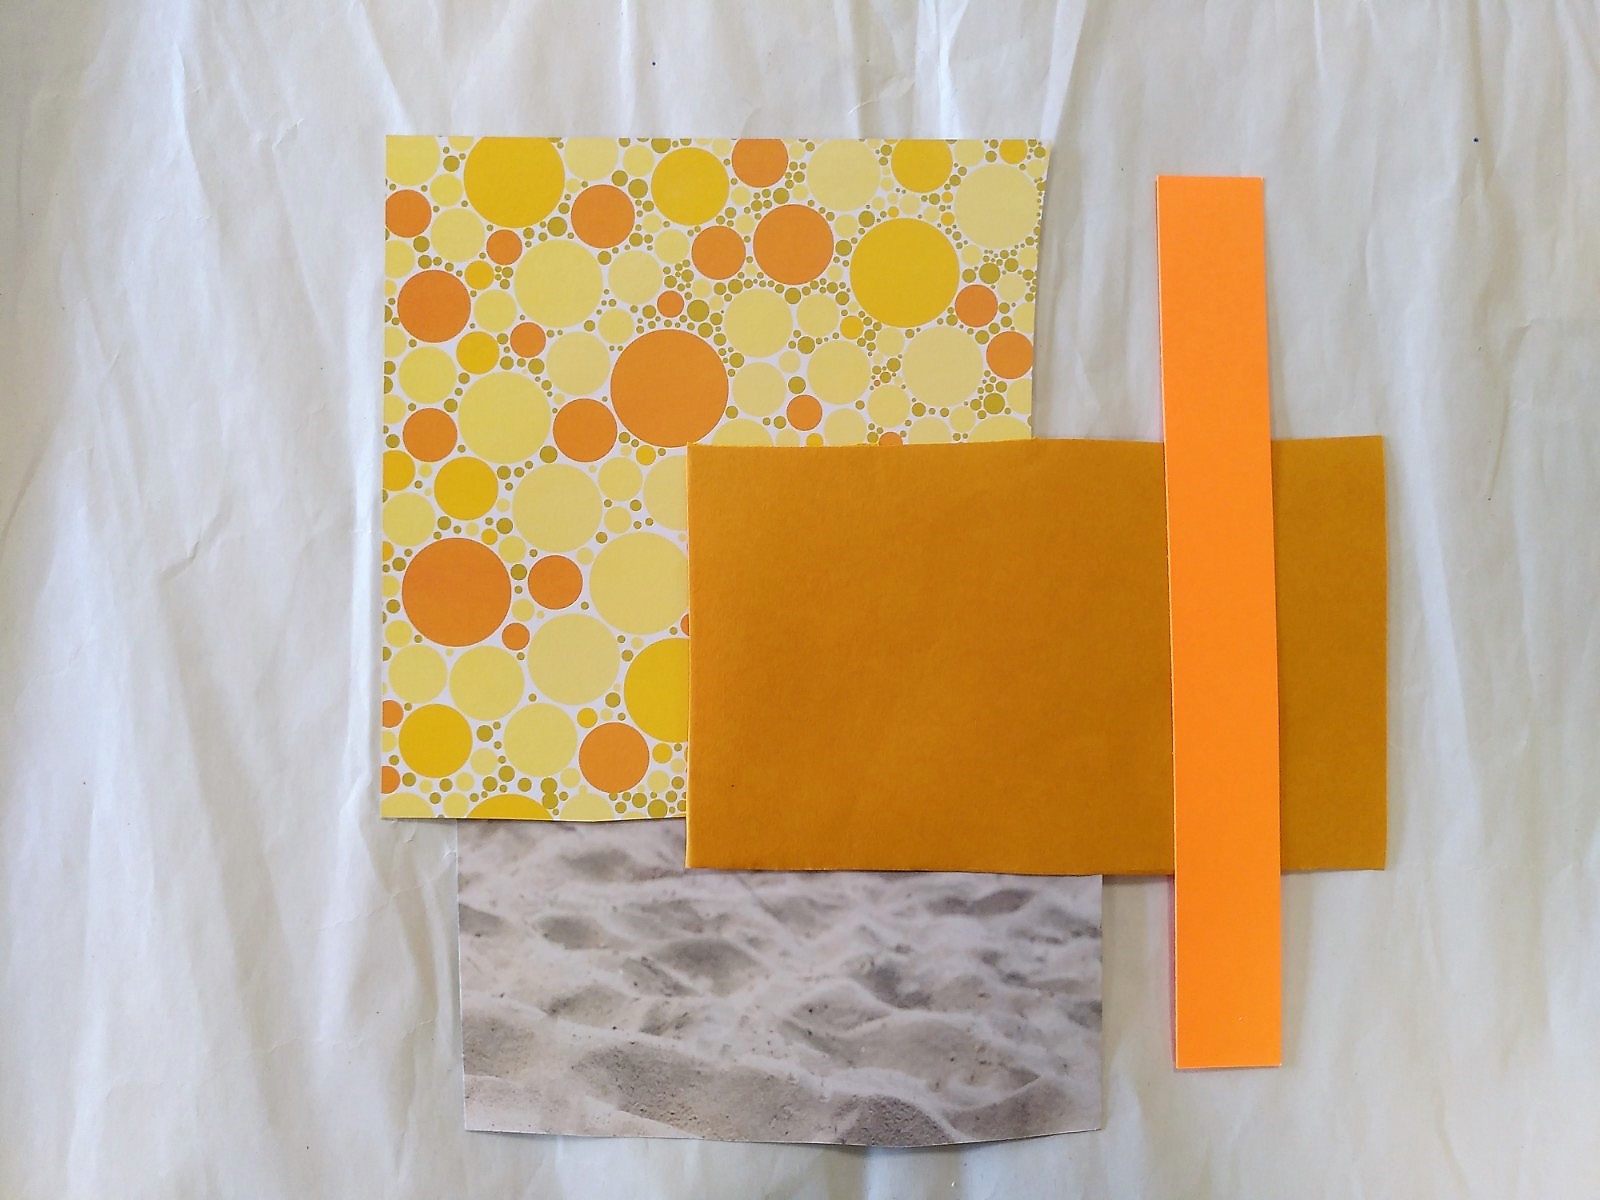 Mood board of yellows, orange and browns